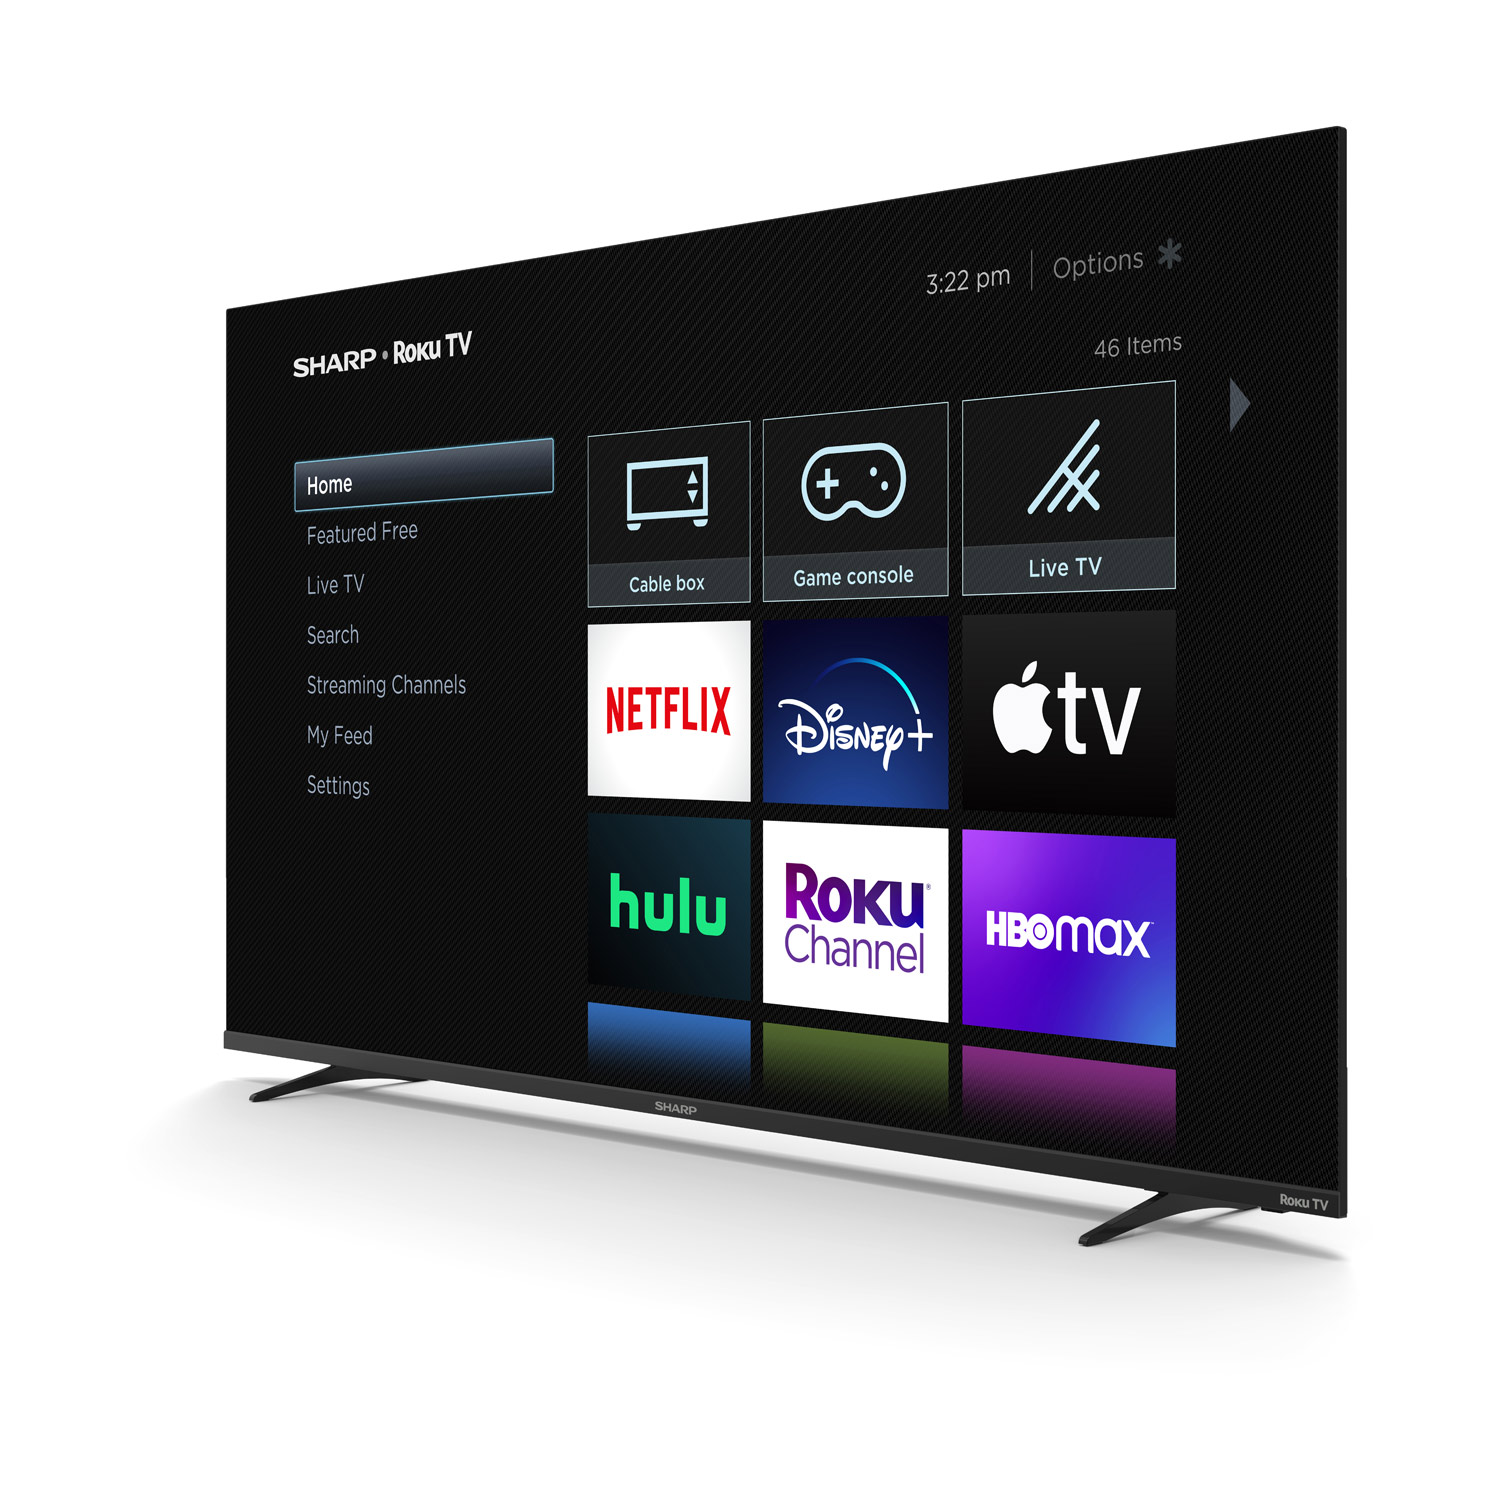 Available Ports on the SHARP® AQUOS 65" Class (64.5" diag.) LED 4K Smart Roku TV with HDR10 (4T-C65DL7UR)